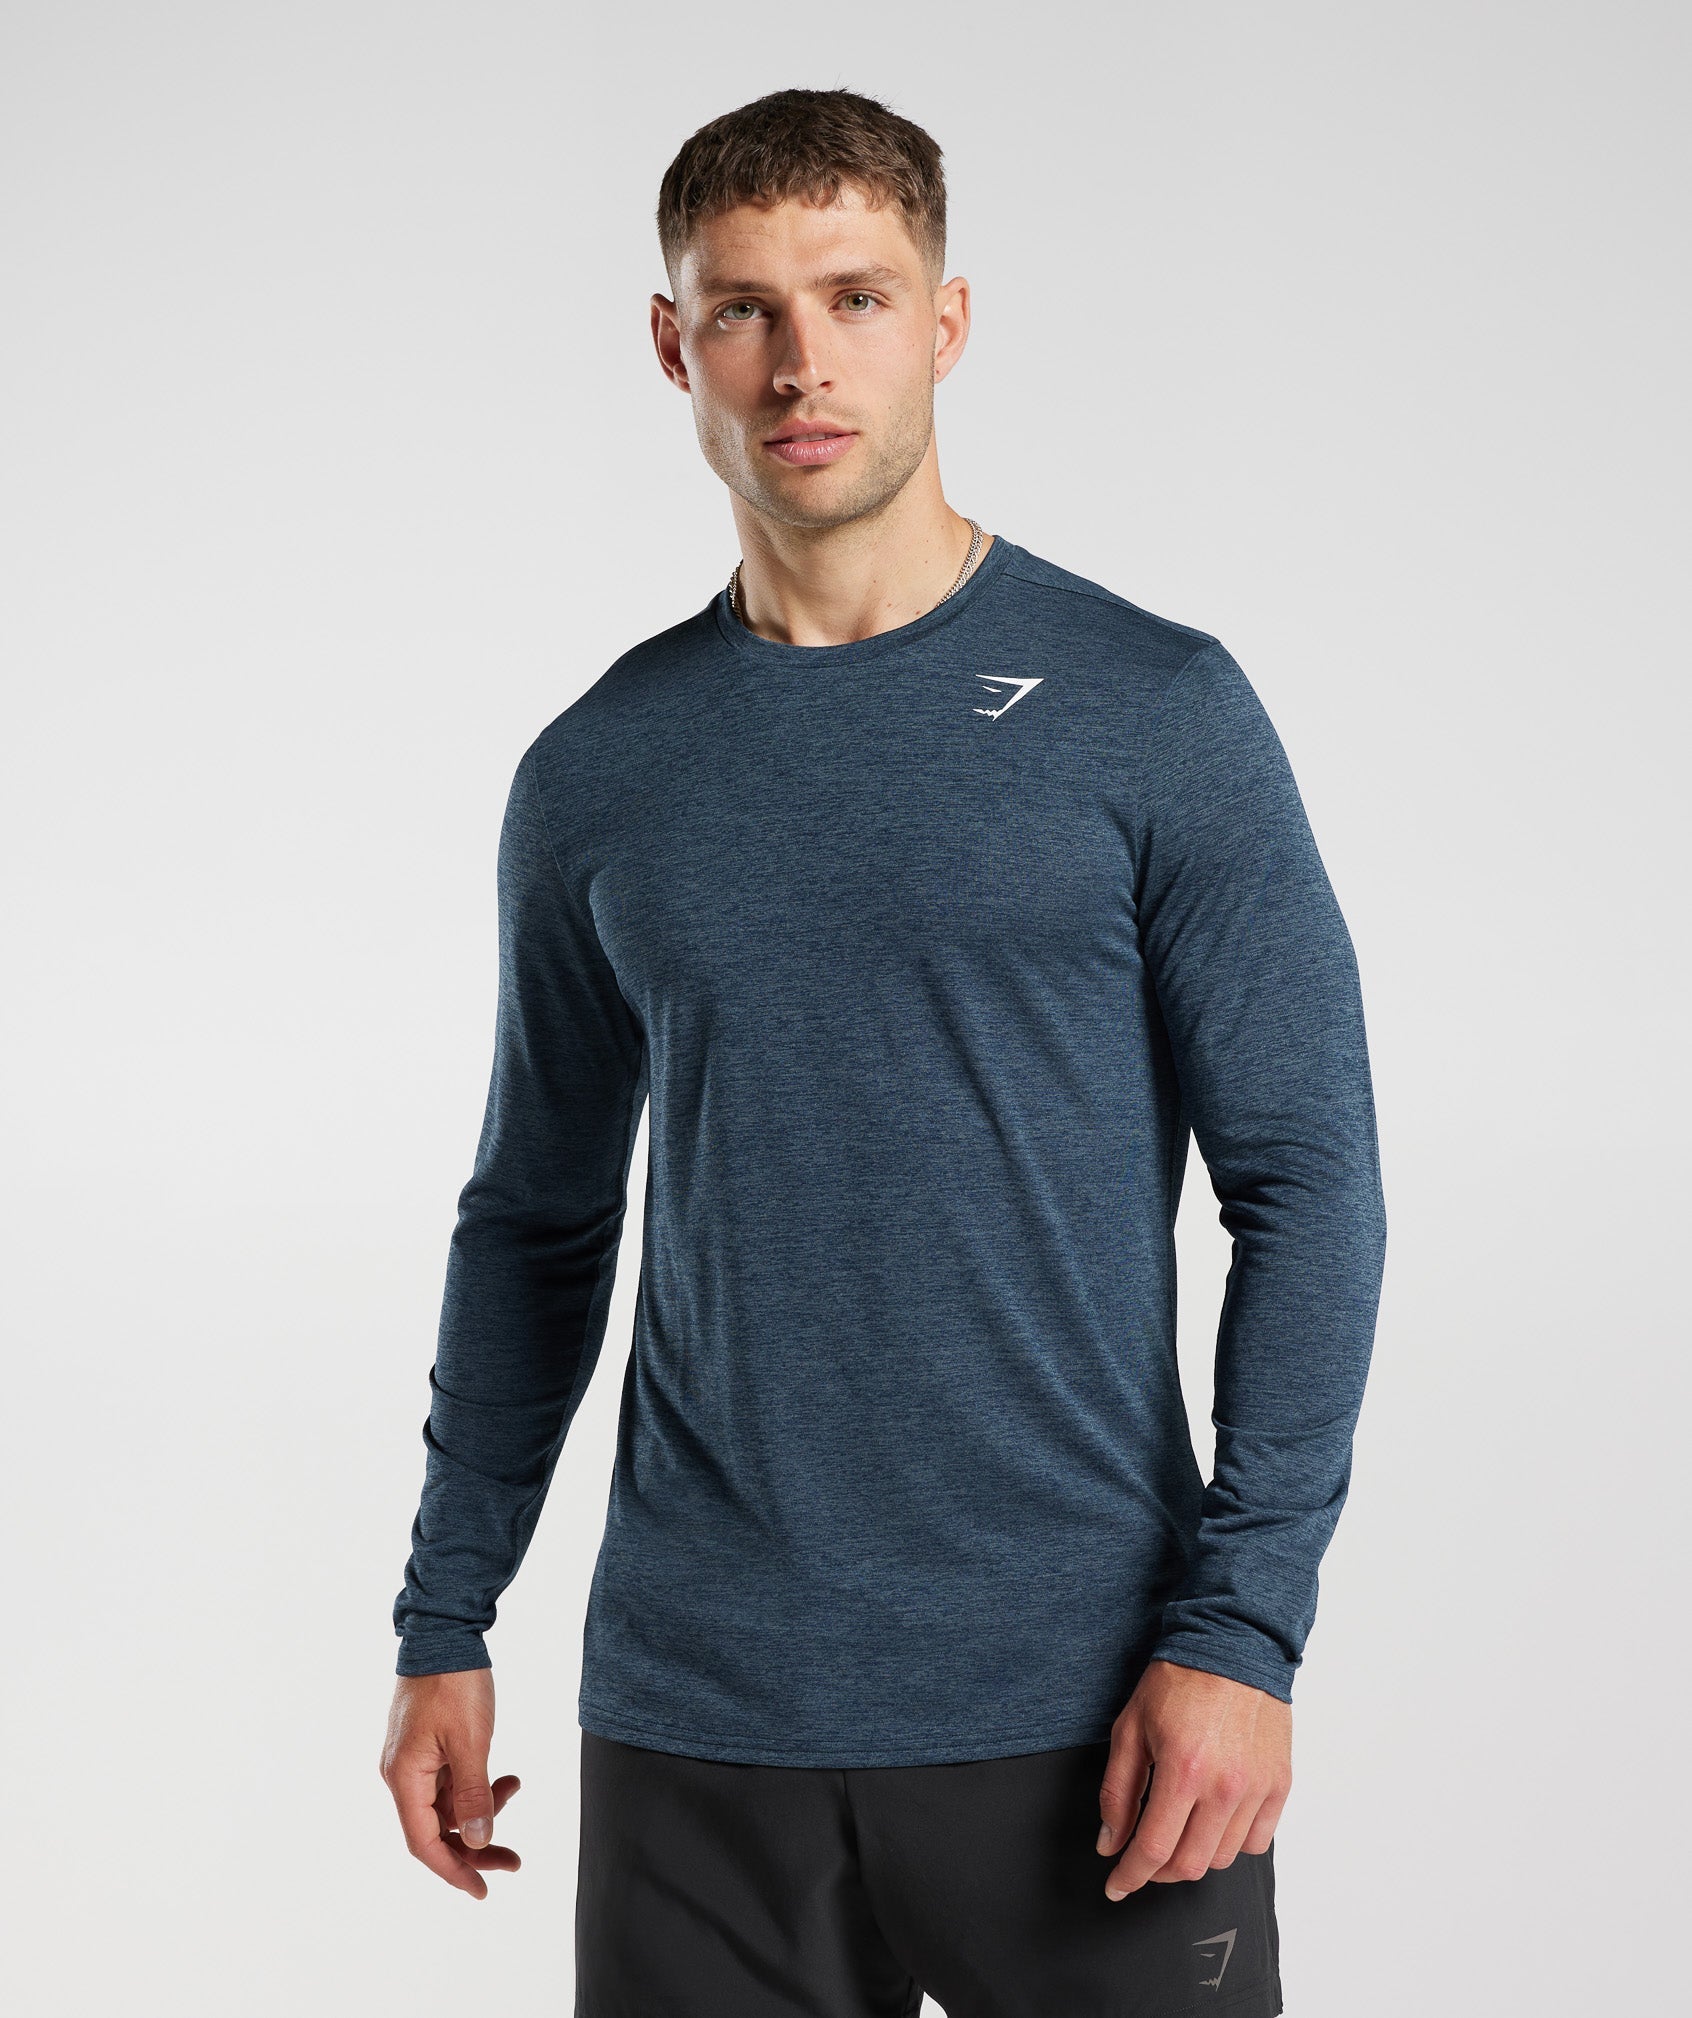 Arrival Marl Long Sleeve T-Shirt in Navy/Smokey Teal Marl - view 1